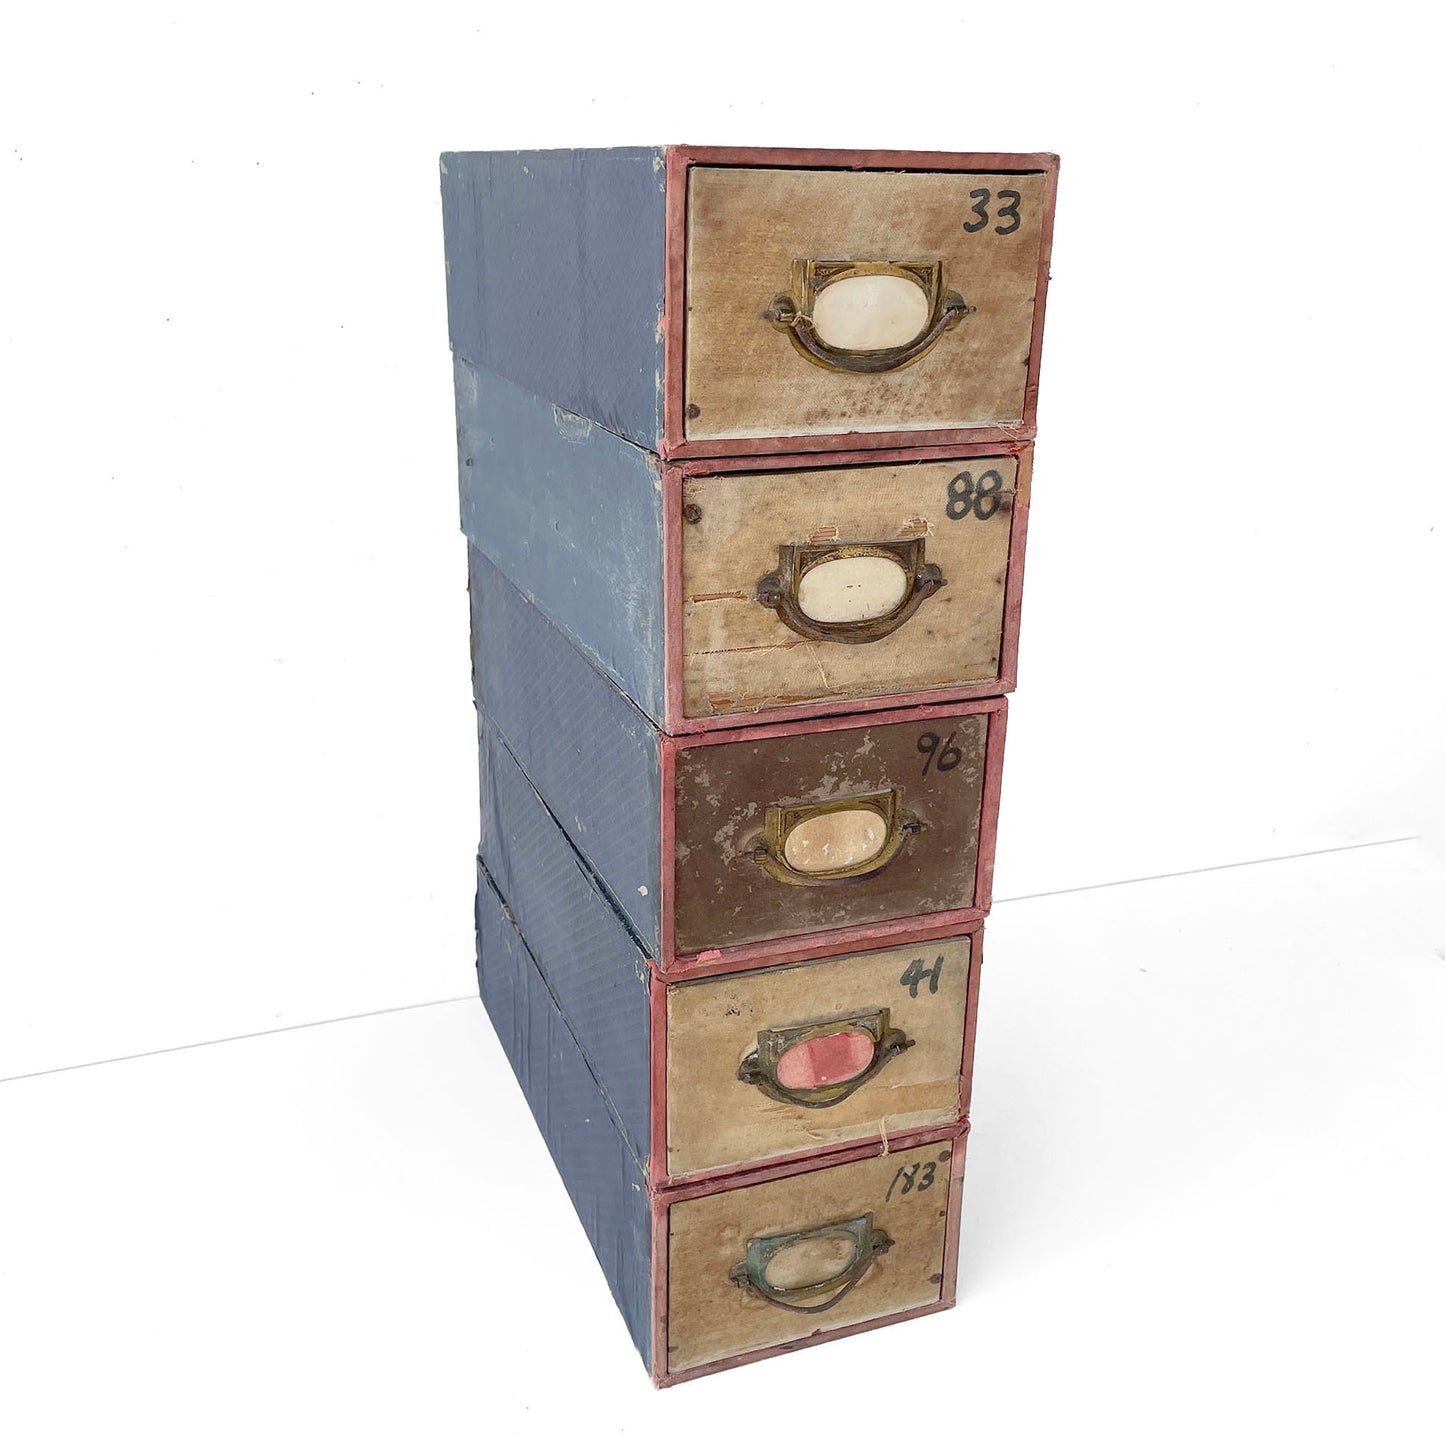 Early 20th Century French Index Card Drawer – 33